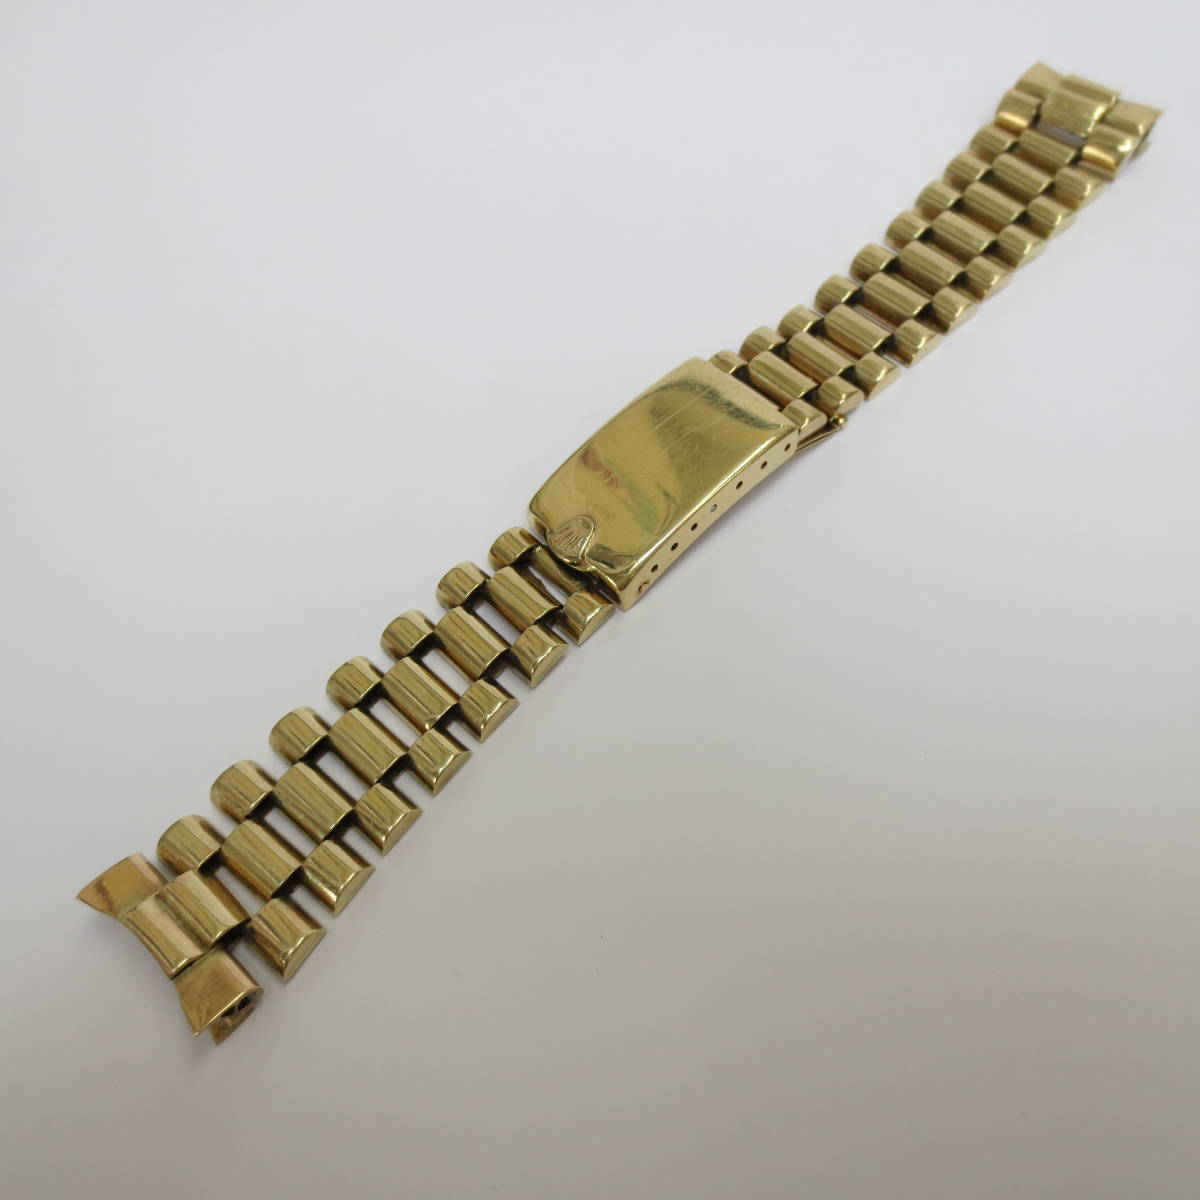 0 ROLEX correspondence piece breath 18K inscription 9 gold yellow gold purity 19mm another work thing gross weight 39g